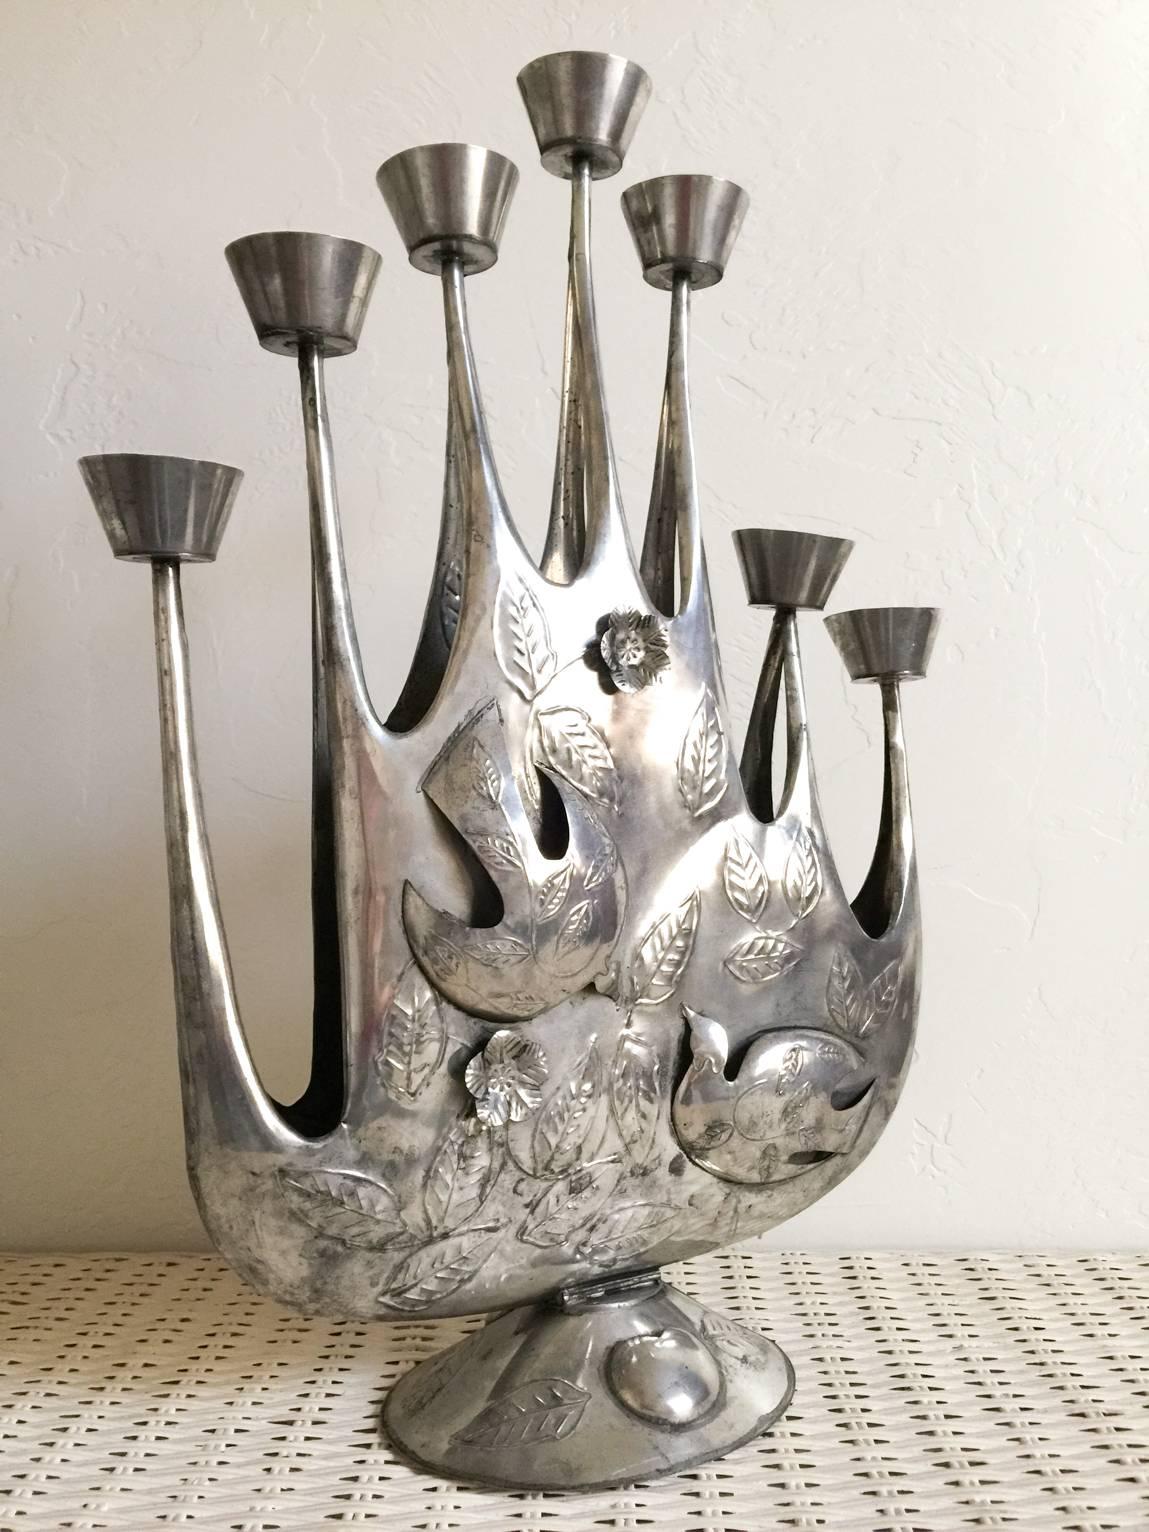 Incredibly rare and beautiful modernist tin candelabra by Mexican artist Gene Byron. Handmade of hand-hammered tin with lovely detail, this beautiful piece was also featured in the shipway Mexican modernism design books of the 1960s. 

Excellent